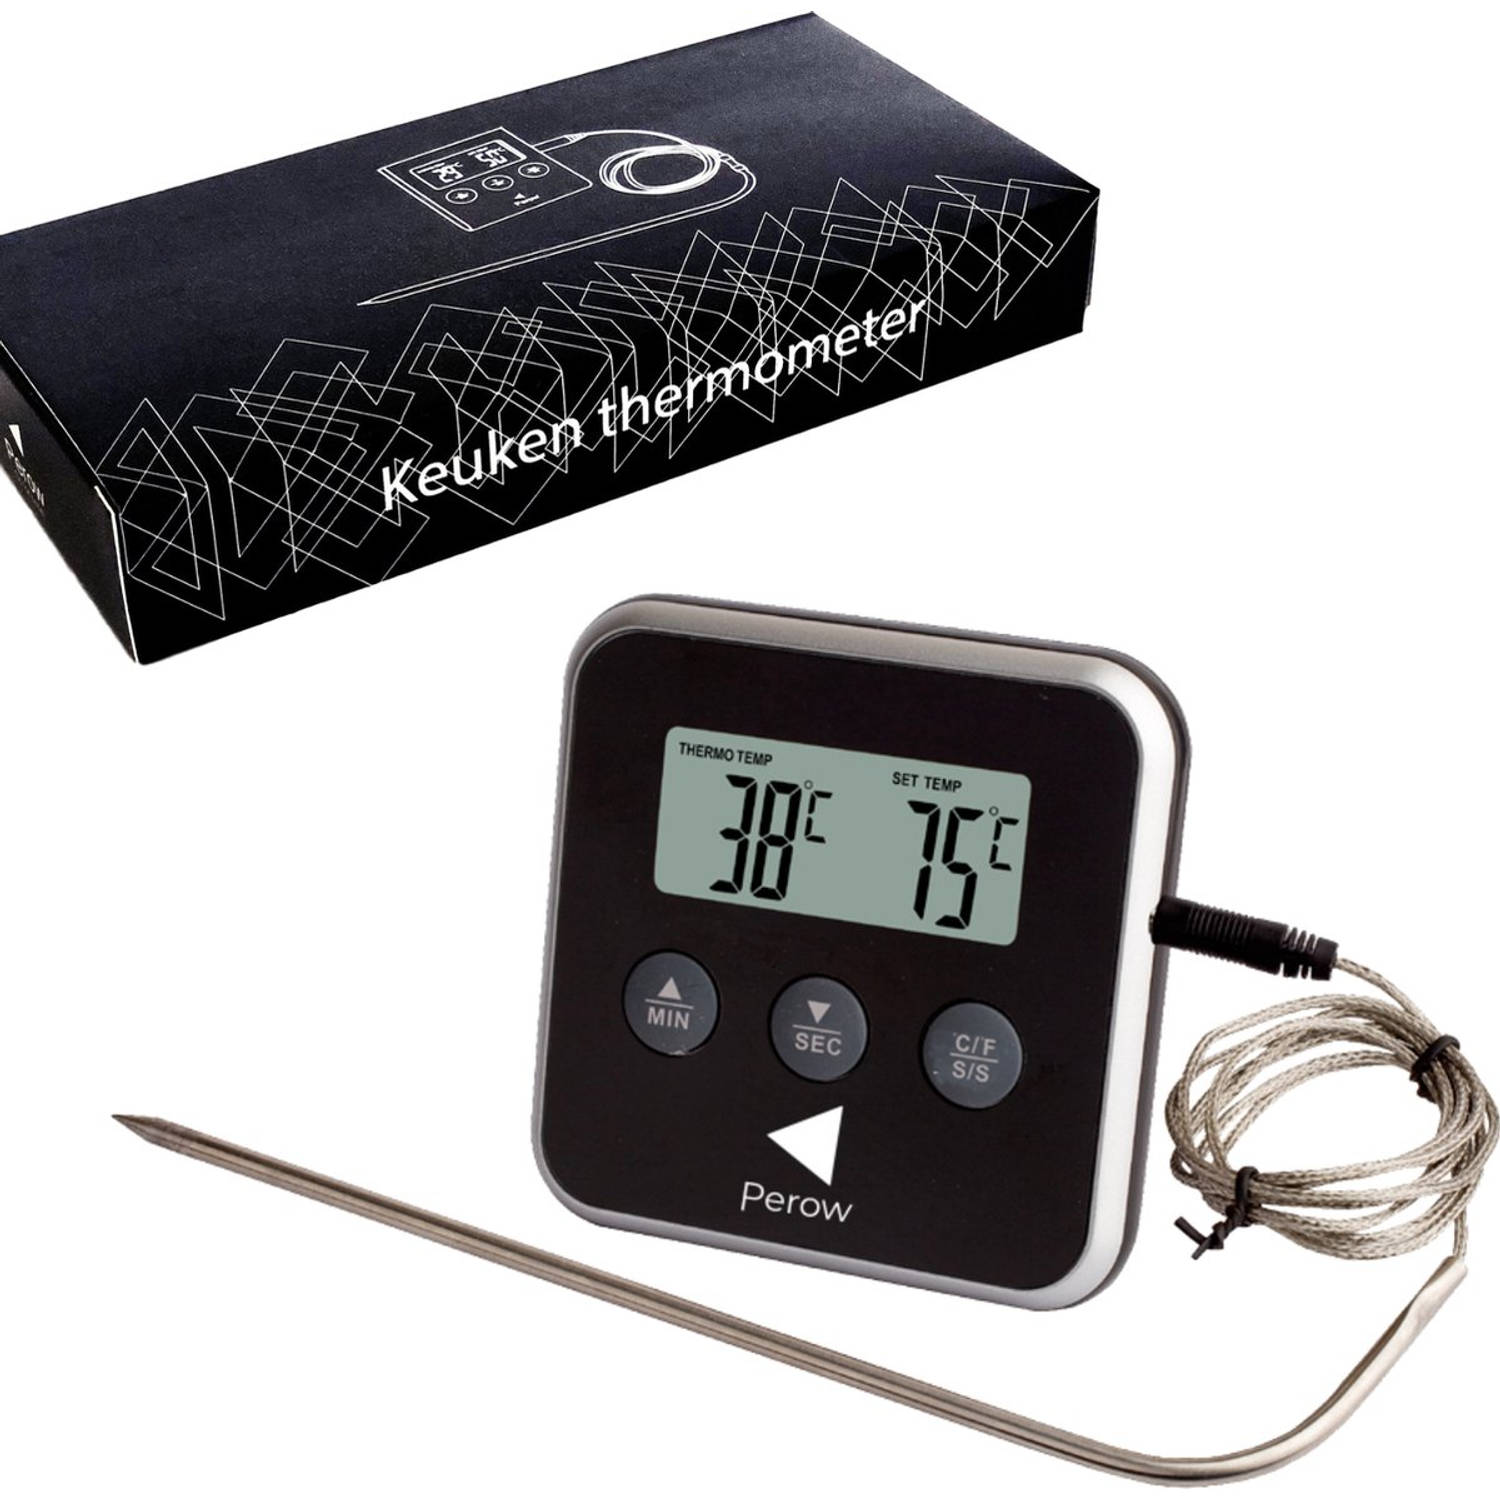 Perow BBQ Thermometer en Wekker Zwart Suikerthermometer Voedselthermometer